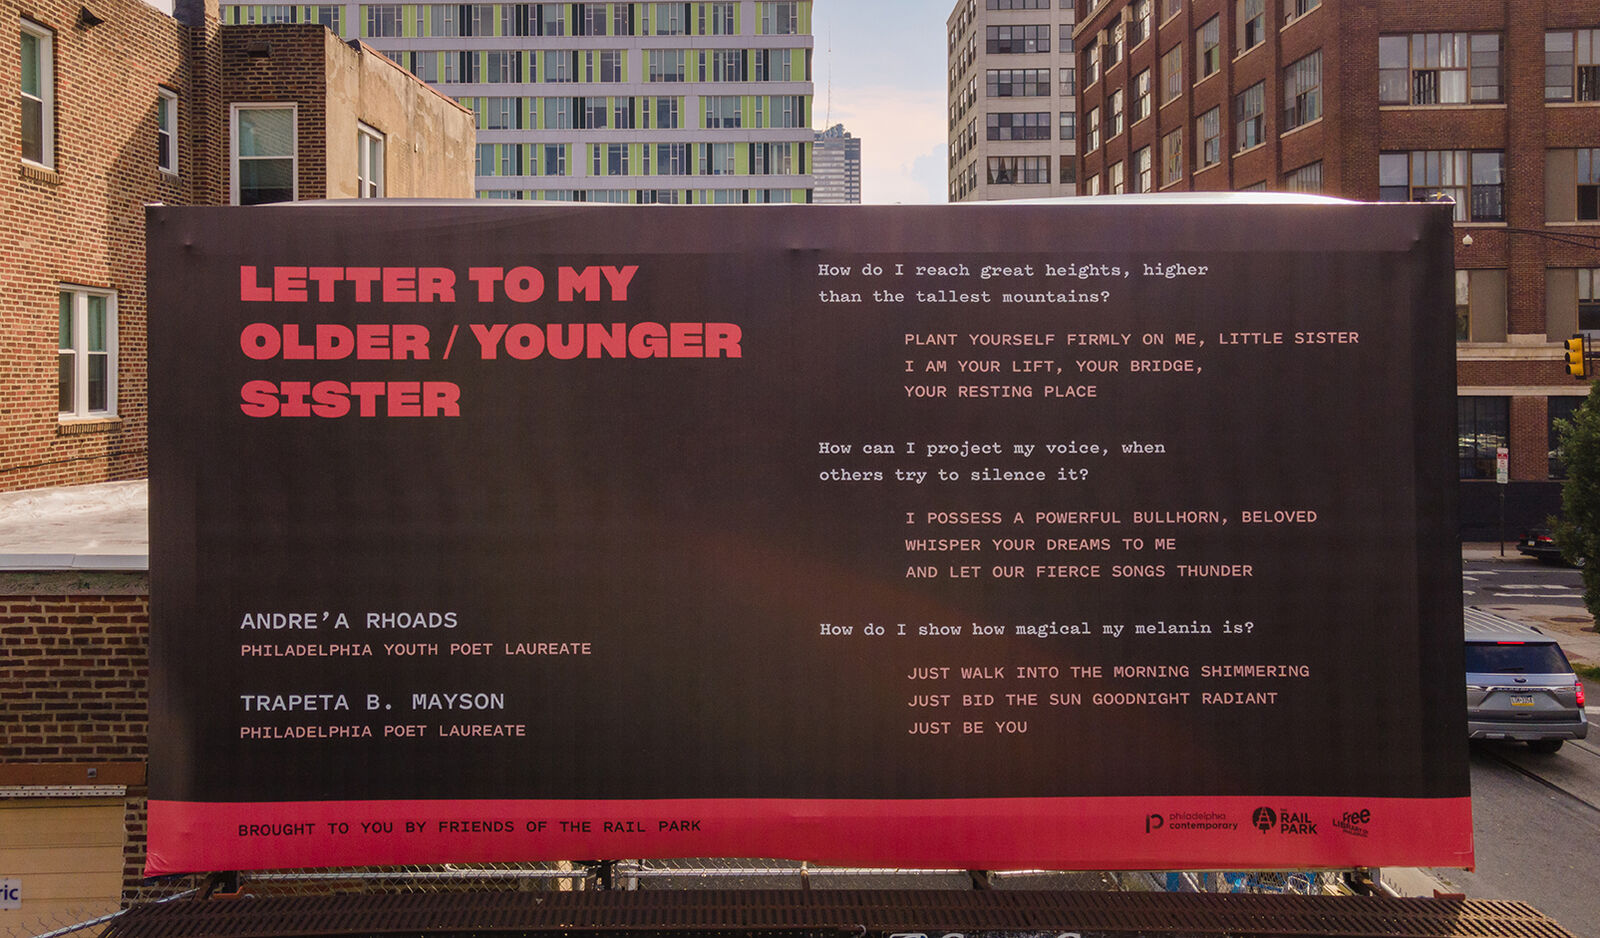 billboard with poem titled "Letter to my older/younger sister", a poem featuring a back and forth conversation between two poets